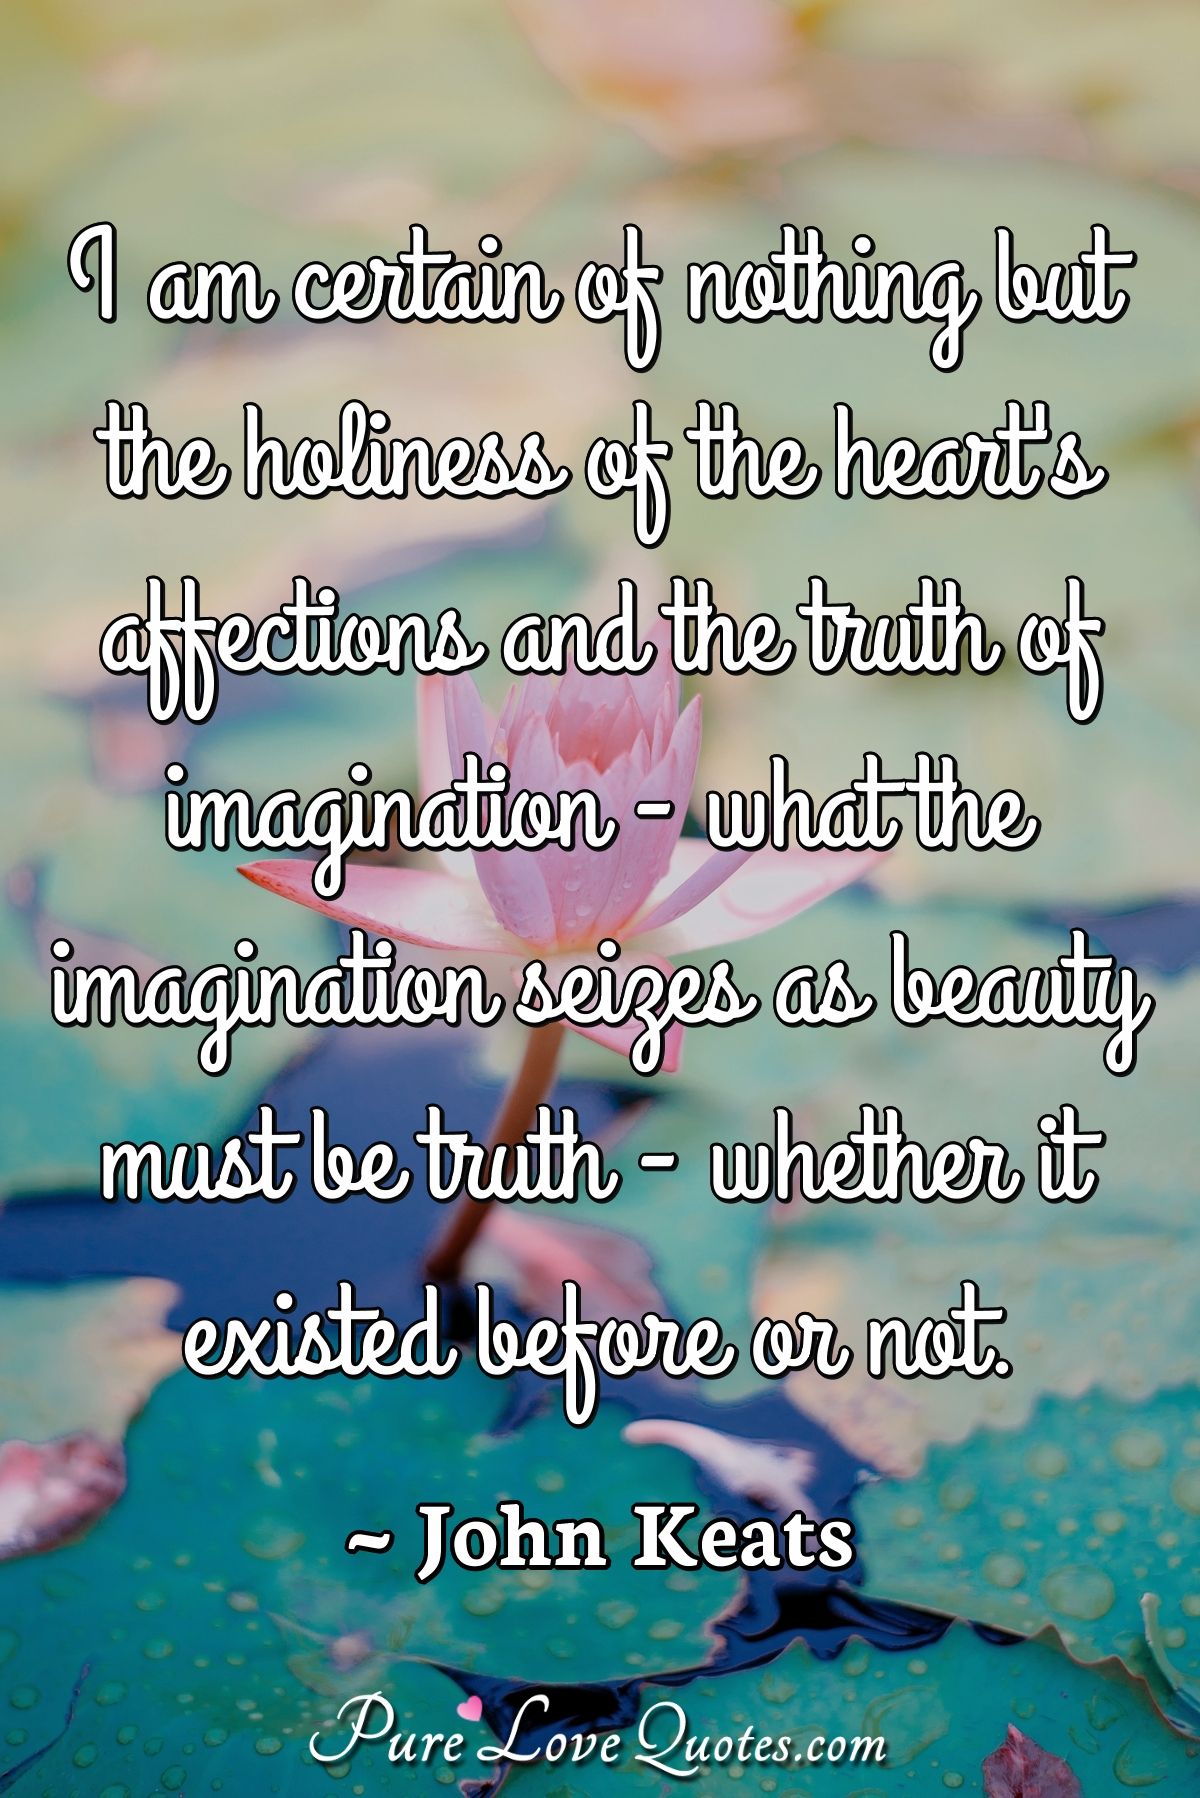 I am certain of nothing but the holiness of the heart's affections and the truth of imagination - what the imagination seizes as beauty must be truth - whether it existed before or not. - John Keats